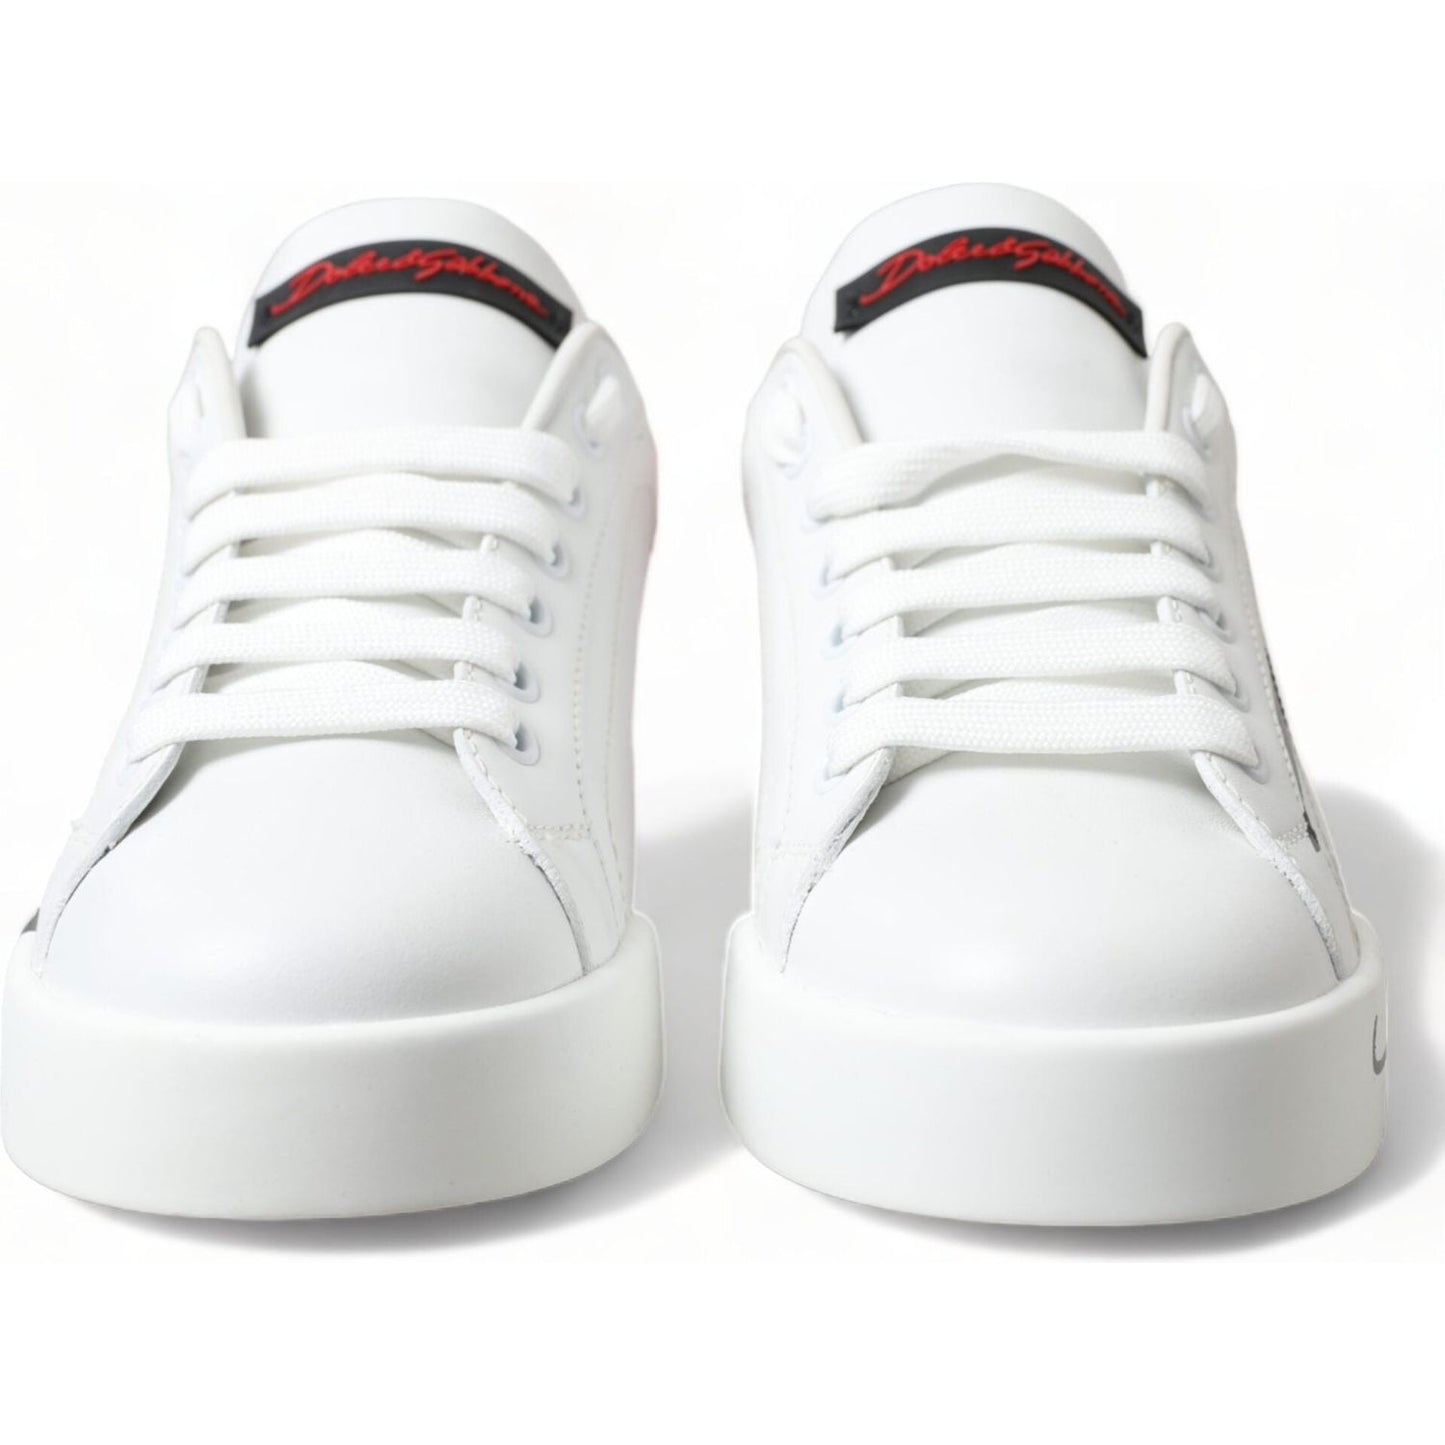 Dolce & Gabbana Elegant White Leather Portofino Sneakers white-red-lace-up-womens-low-top-sneakers-shoes